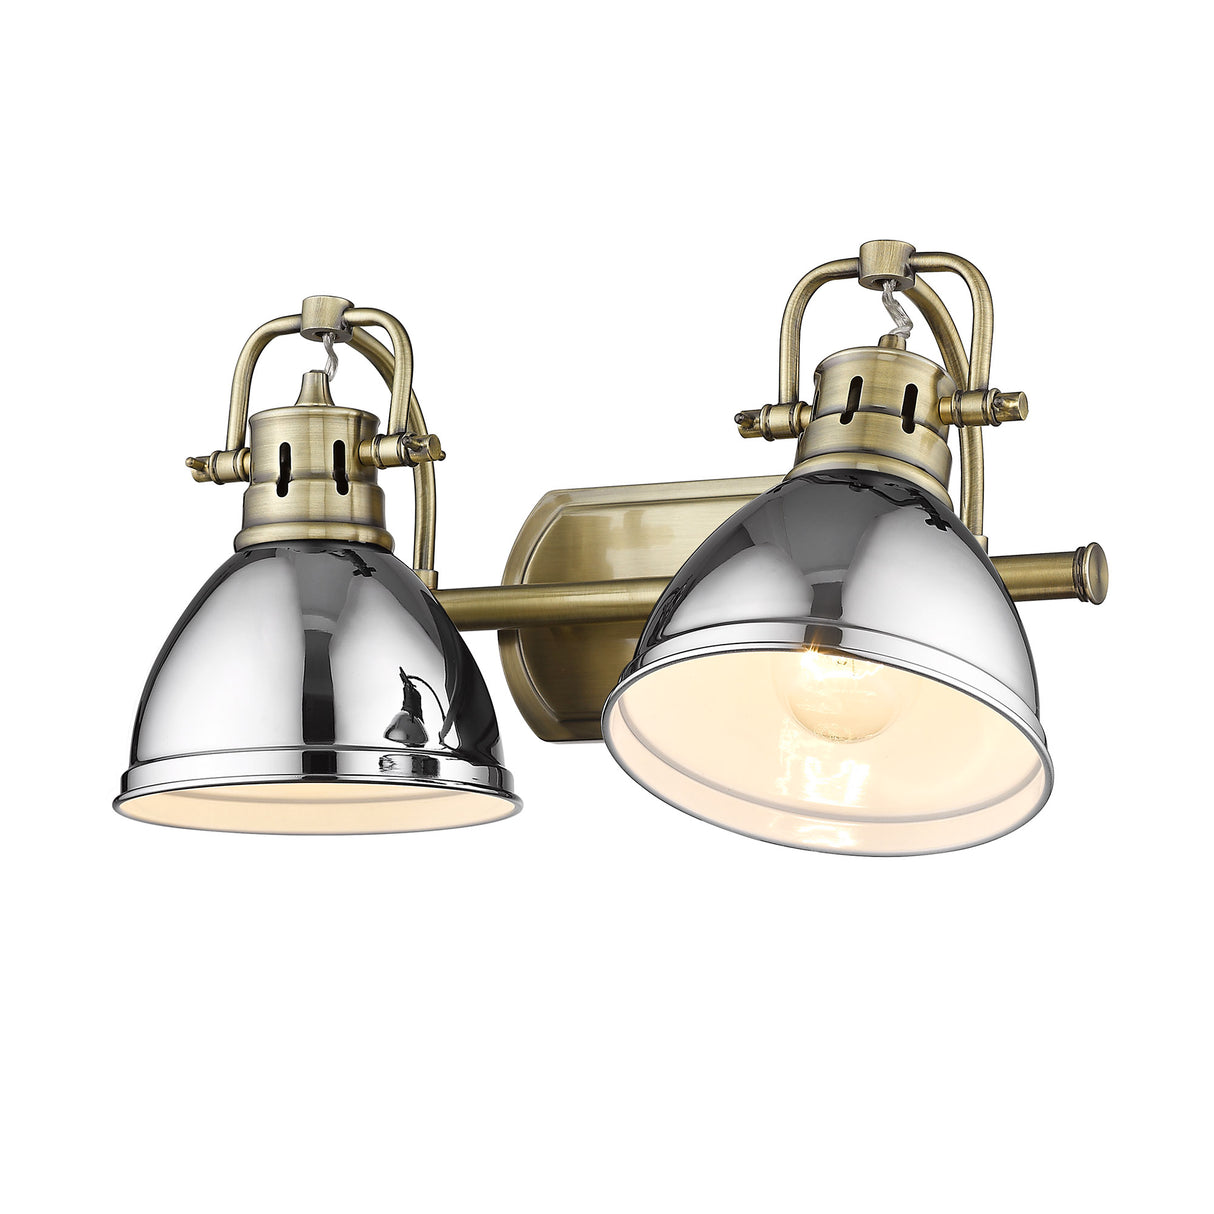 Duncan 2 Light Bath Vanity in Aged Brass with Chrome Shades